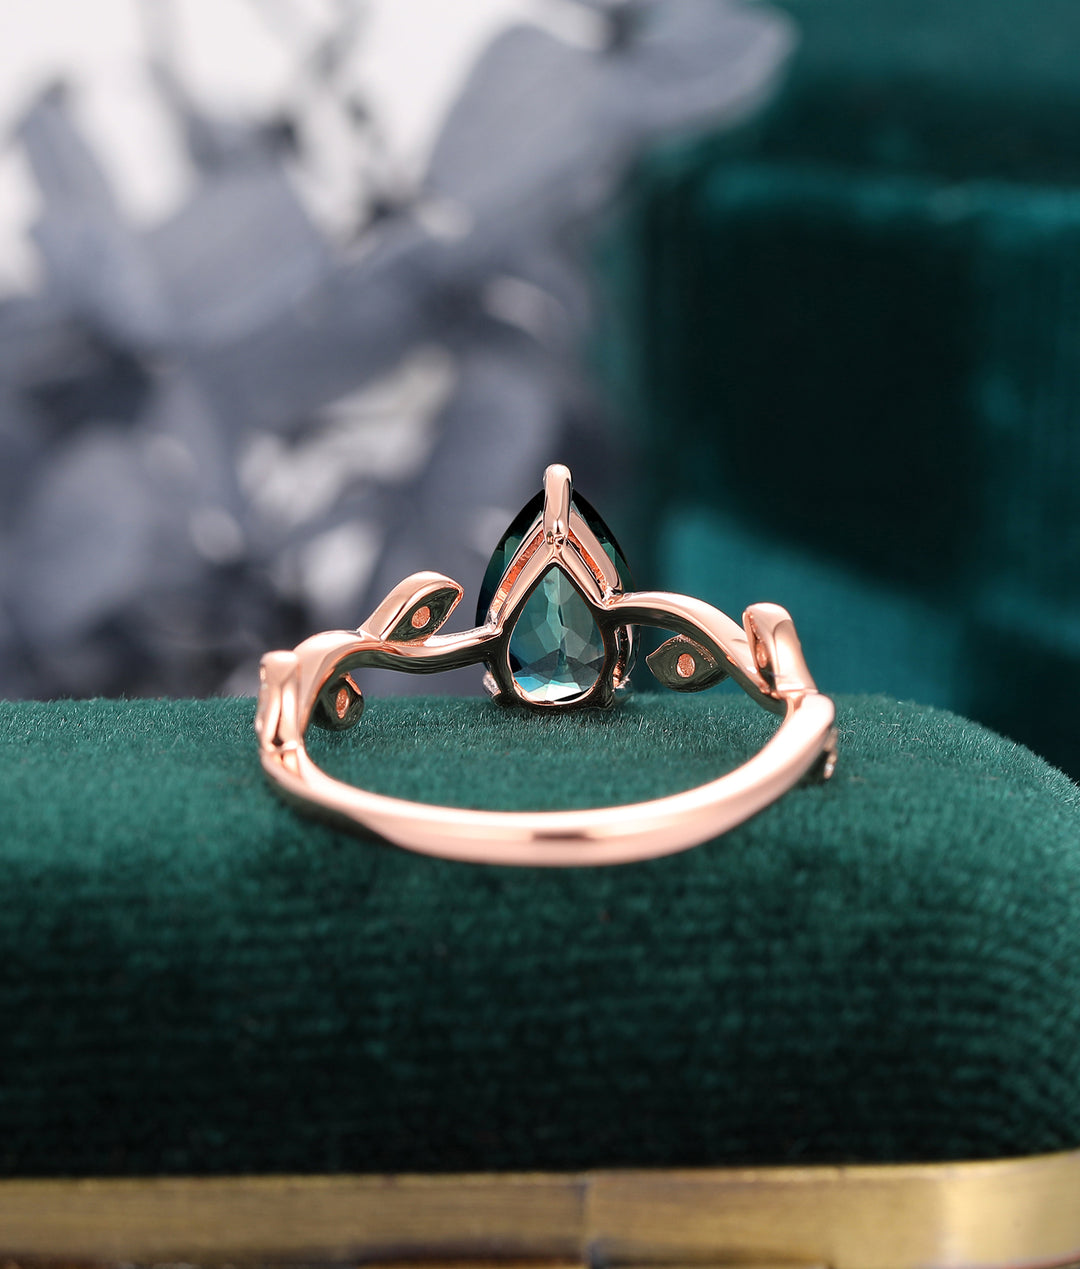 Vintage Teal Sapphire Engagement Ring, Blue Green Sapphire Ring, Prong Set Wedding Rose Gold Ring